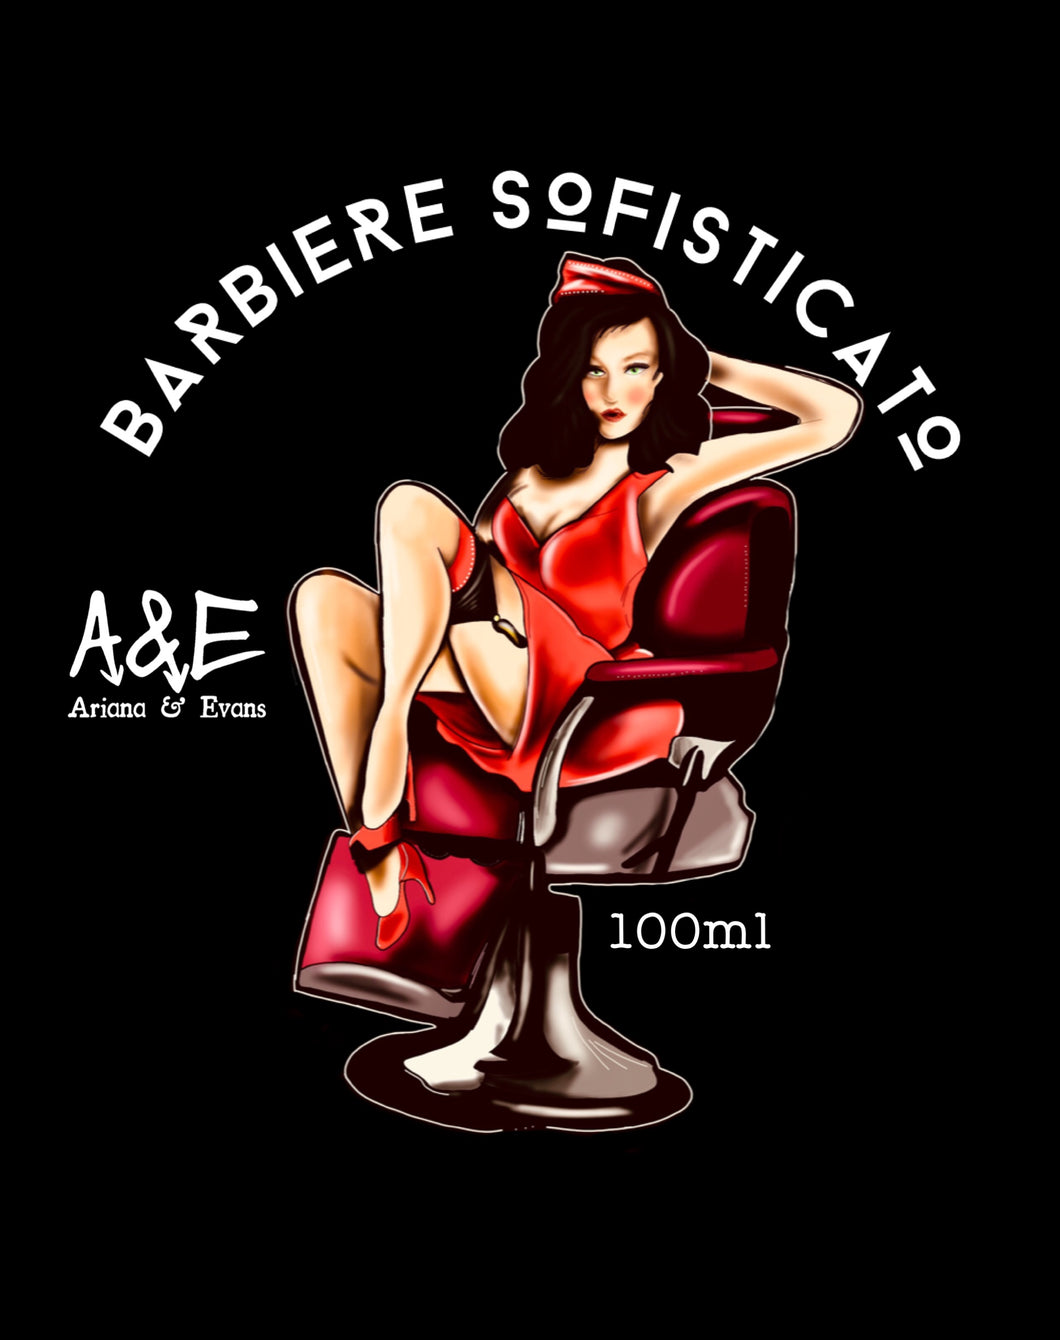 Barbiere Sofisticato Aftershave